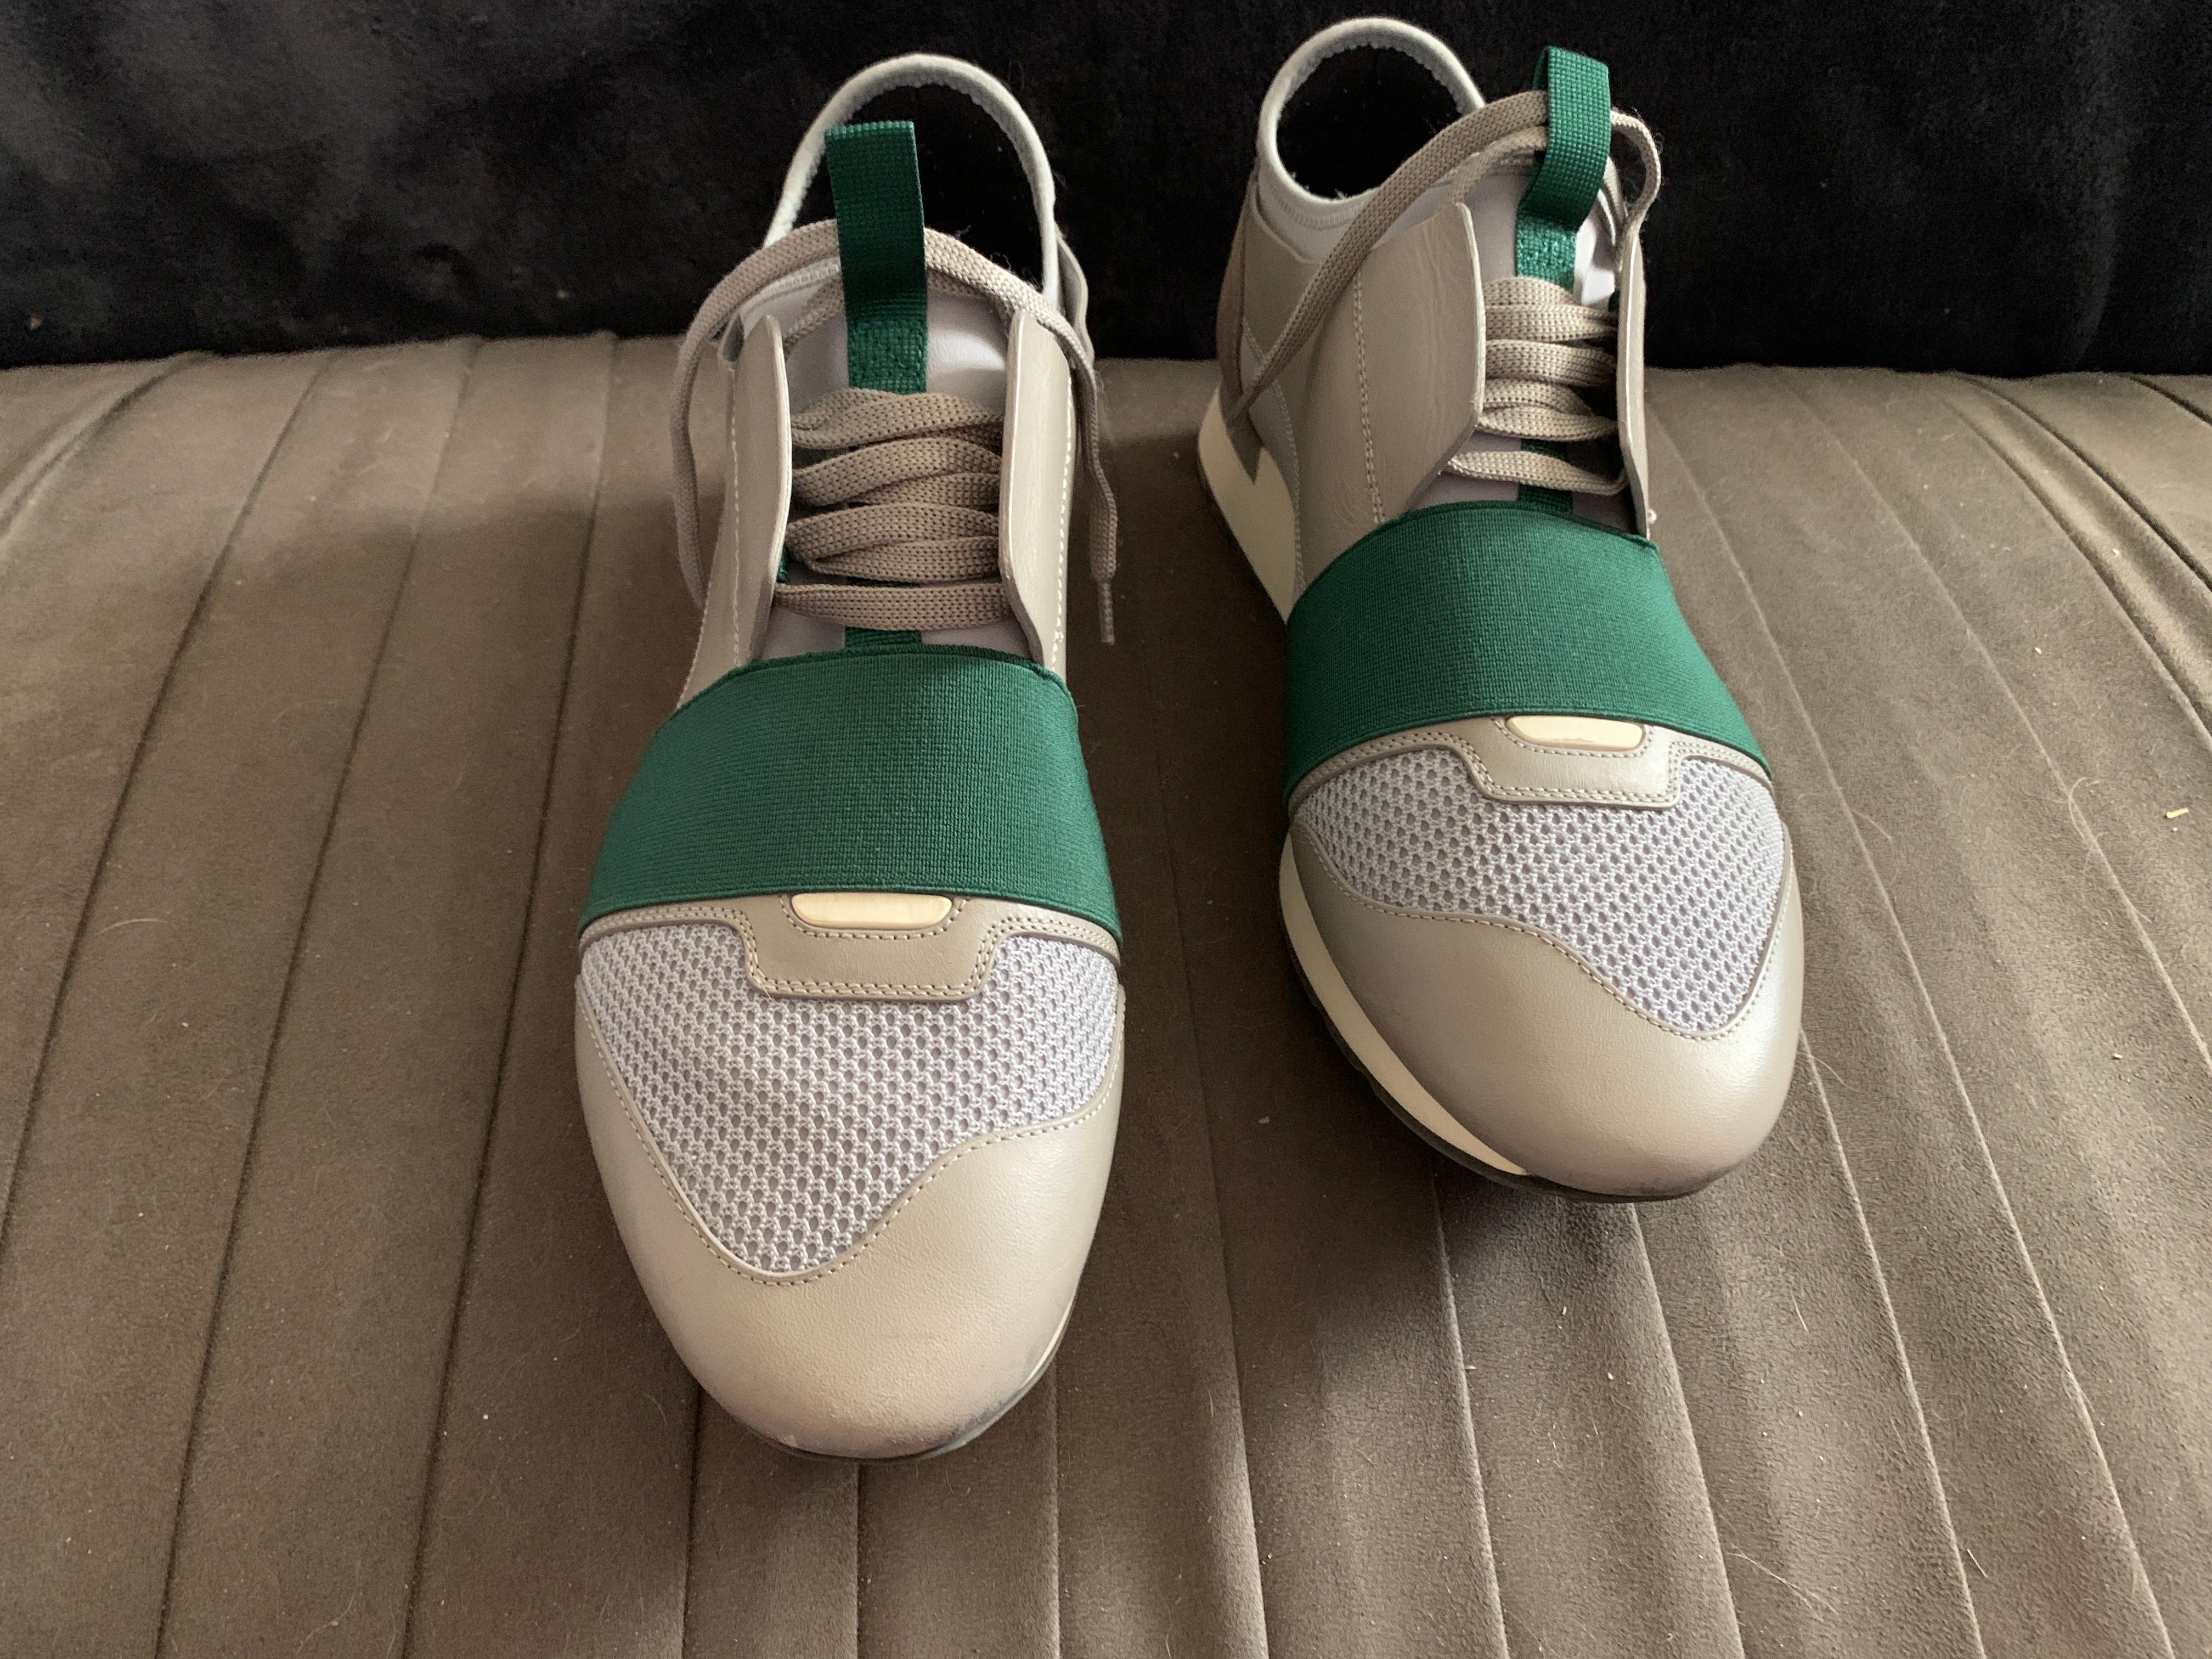 These pair of Balenciaga speed racers came from a client that wore them once. Out of all the athletic shoes that Balenciaga did, these were considered the most popular style as many people wear them with regular clothing, including suits. An